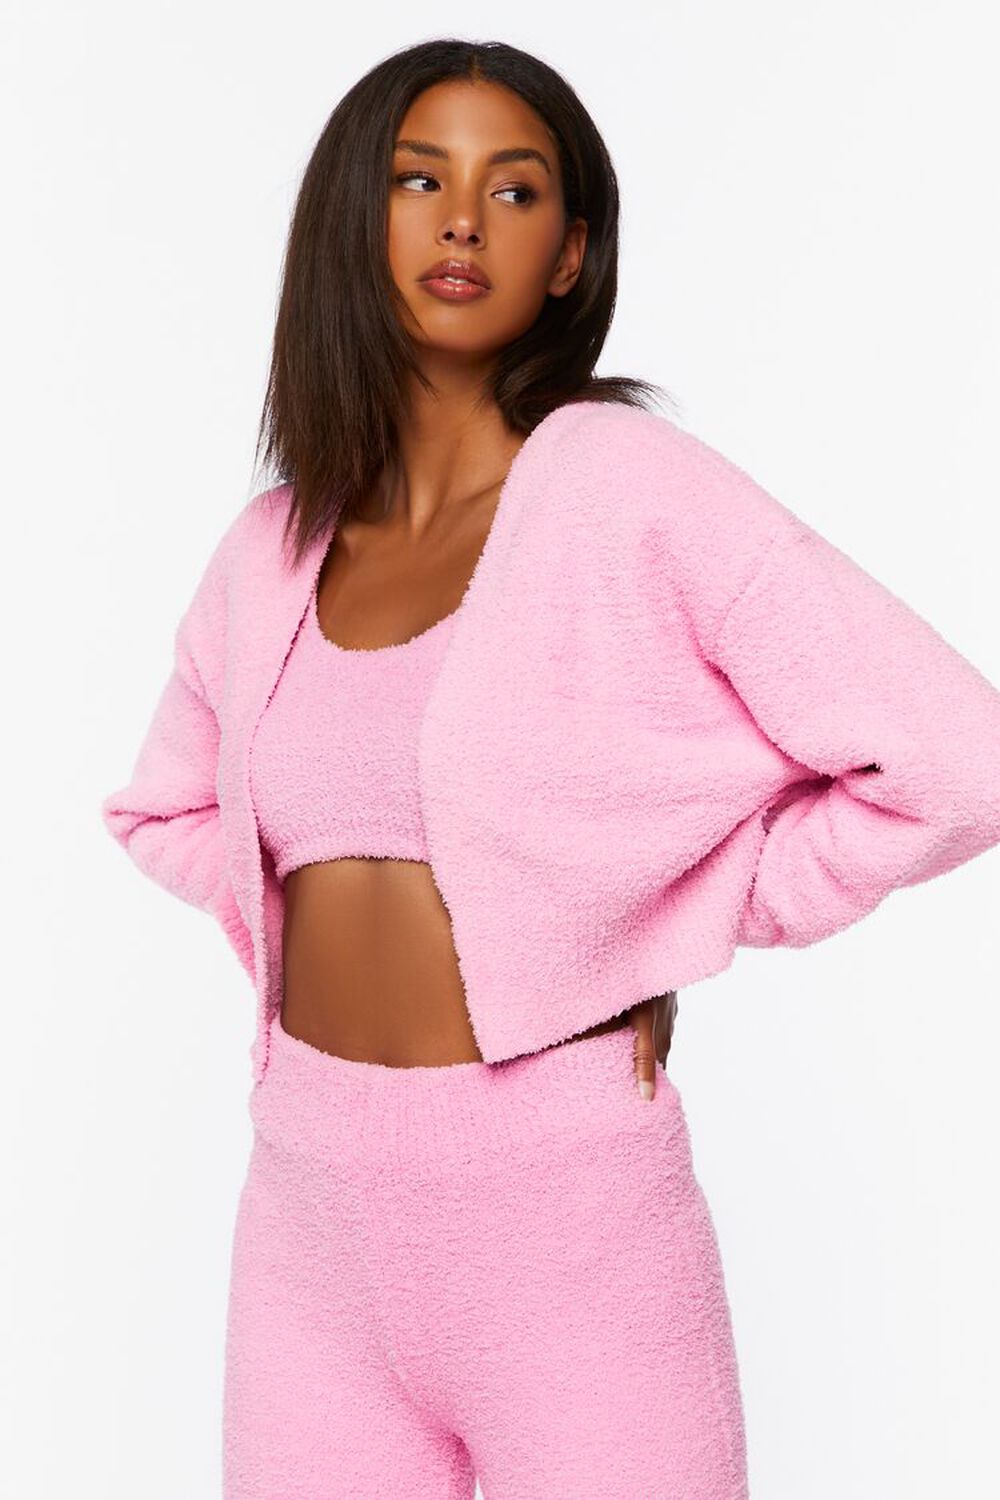 PINK ICING Fuzzy Knit Cardigan Sweater, image 1